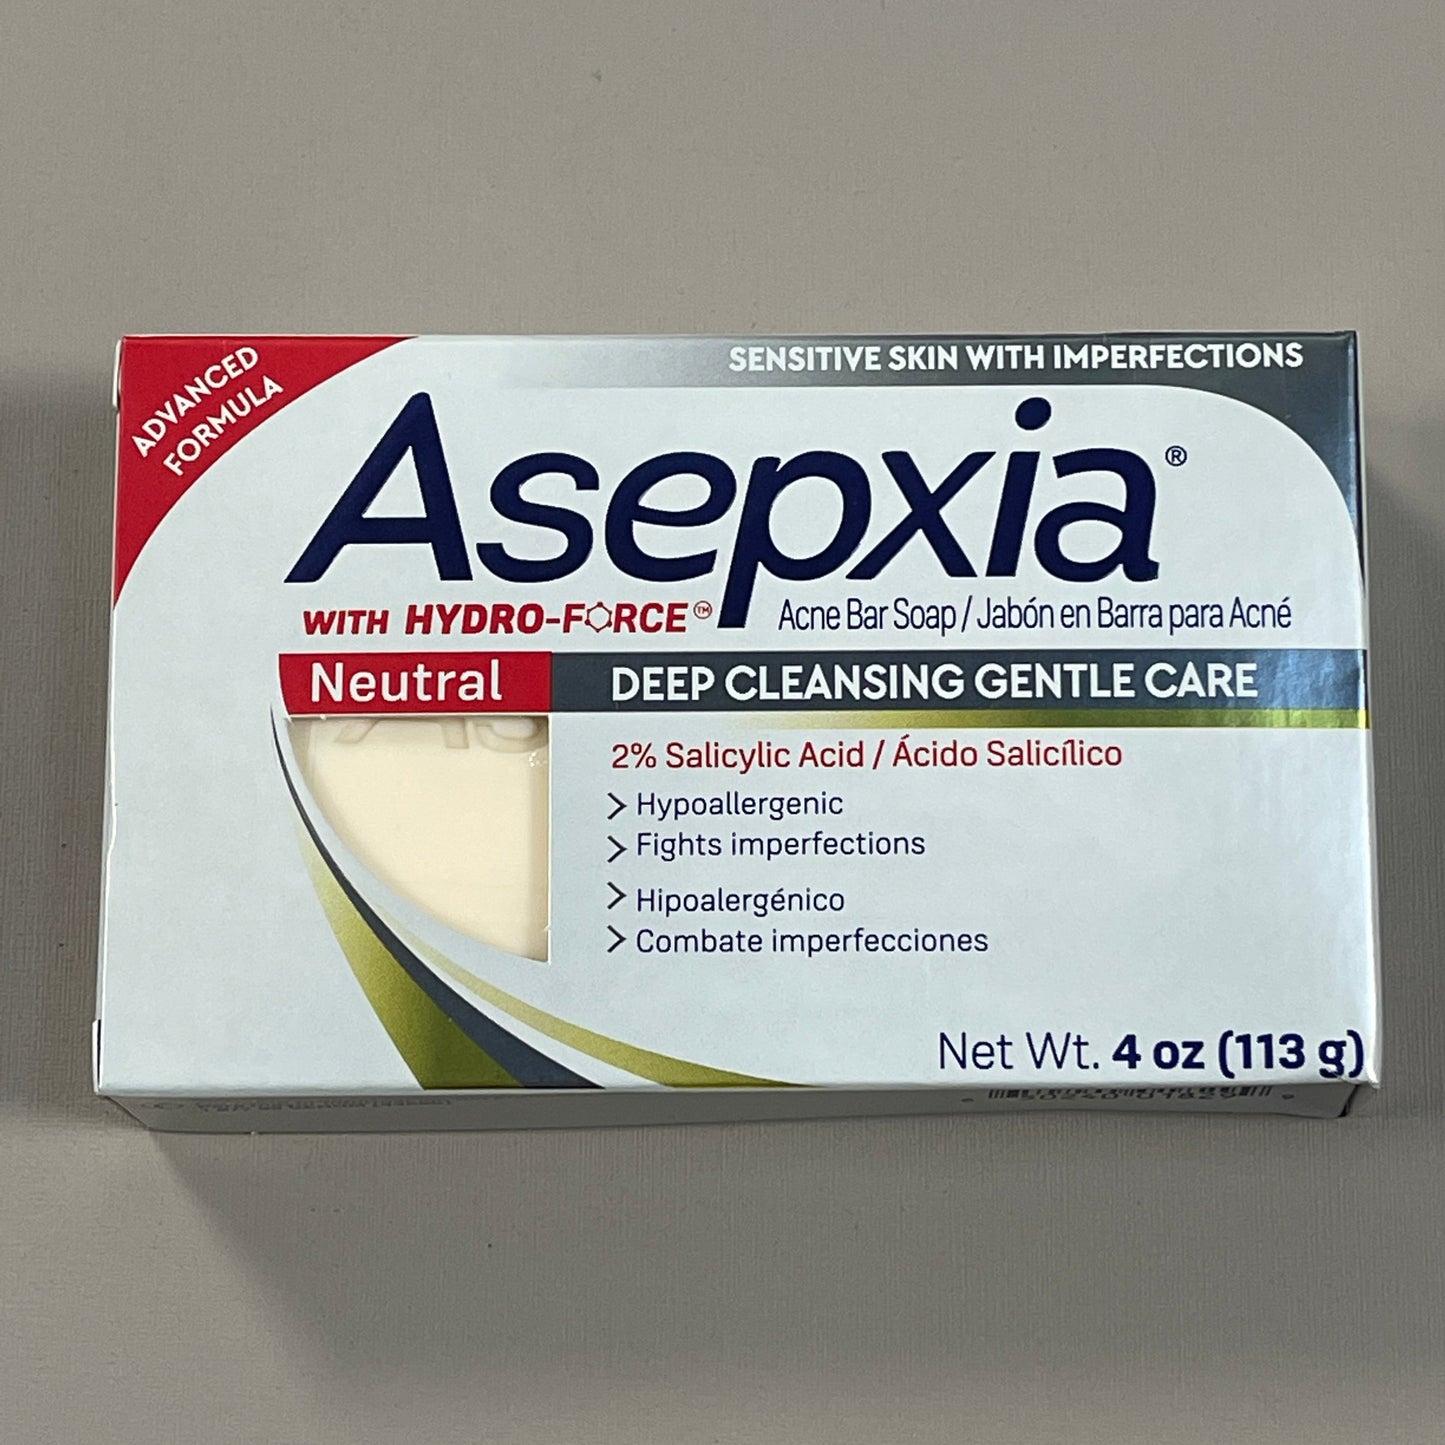 Z@ ASEPXIA Lot of 3 Neutral Deep Cleansing 2% SALICYLIC ACID Gentle Care Acne Soap 4 oz 2/23 (AS-IS)